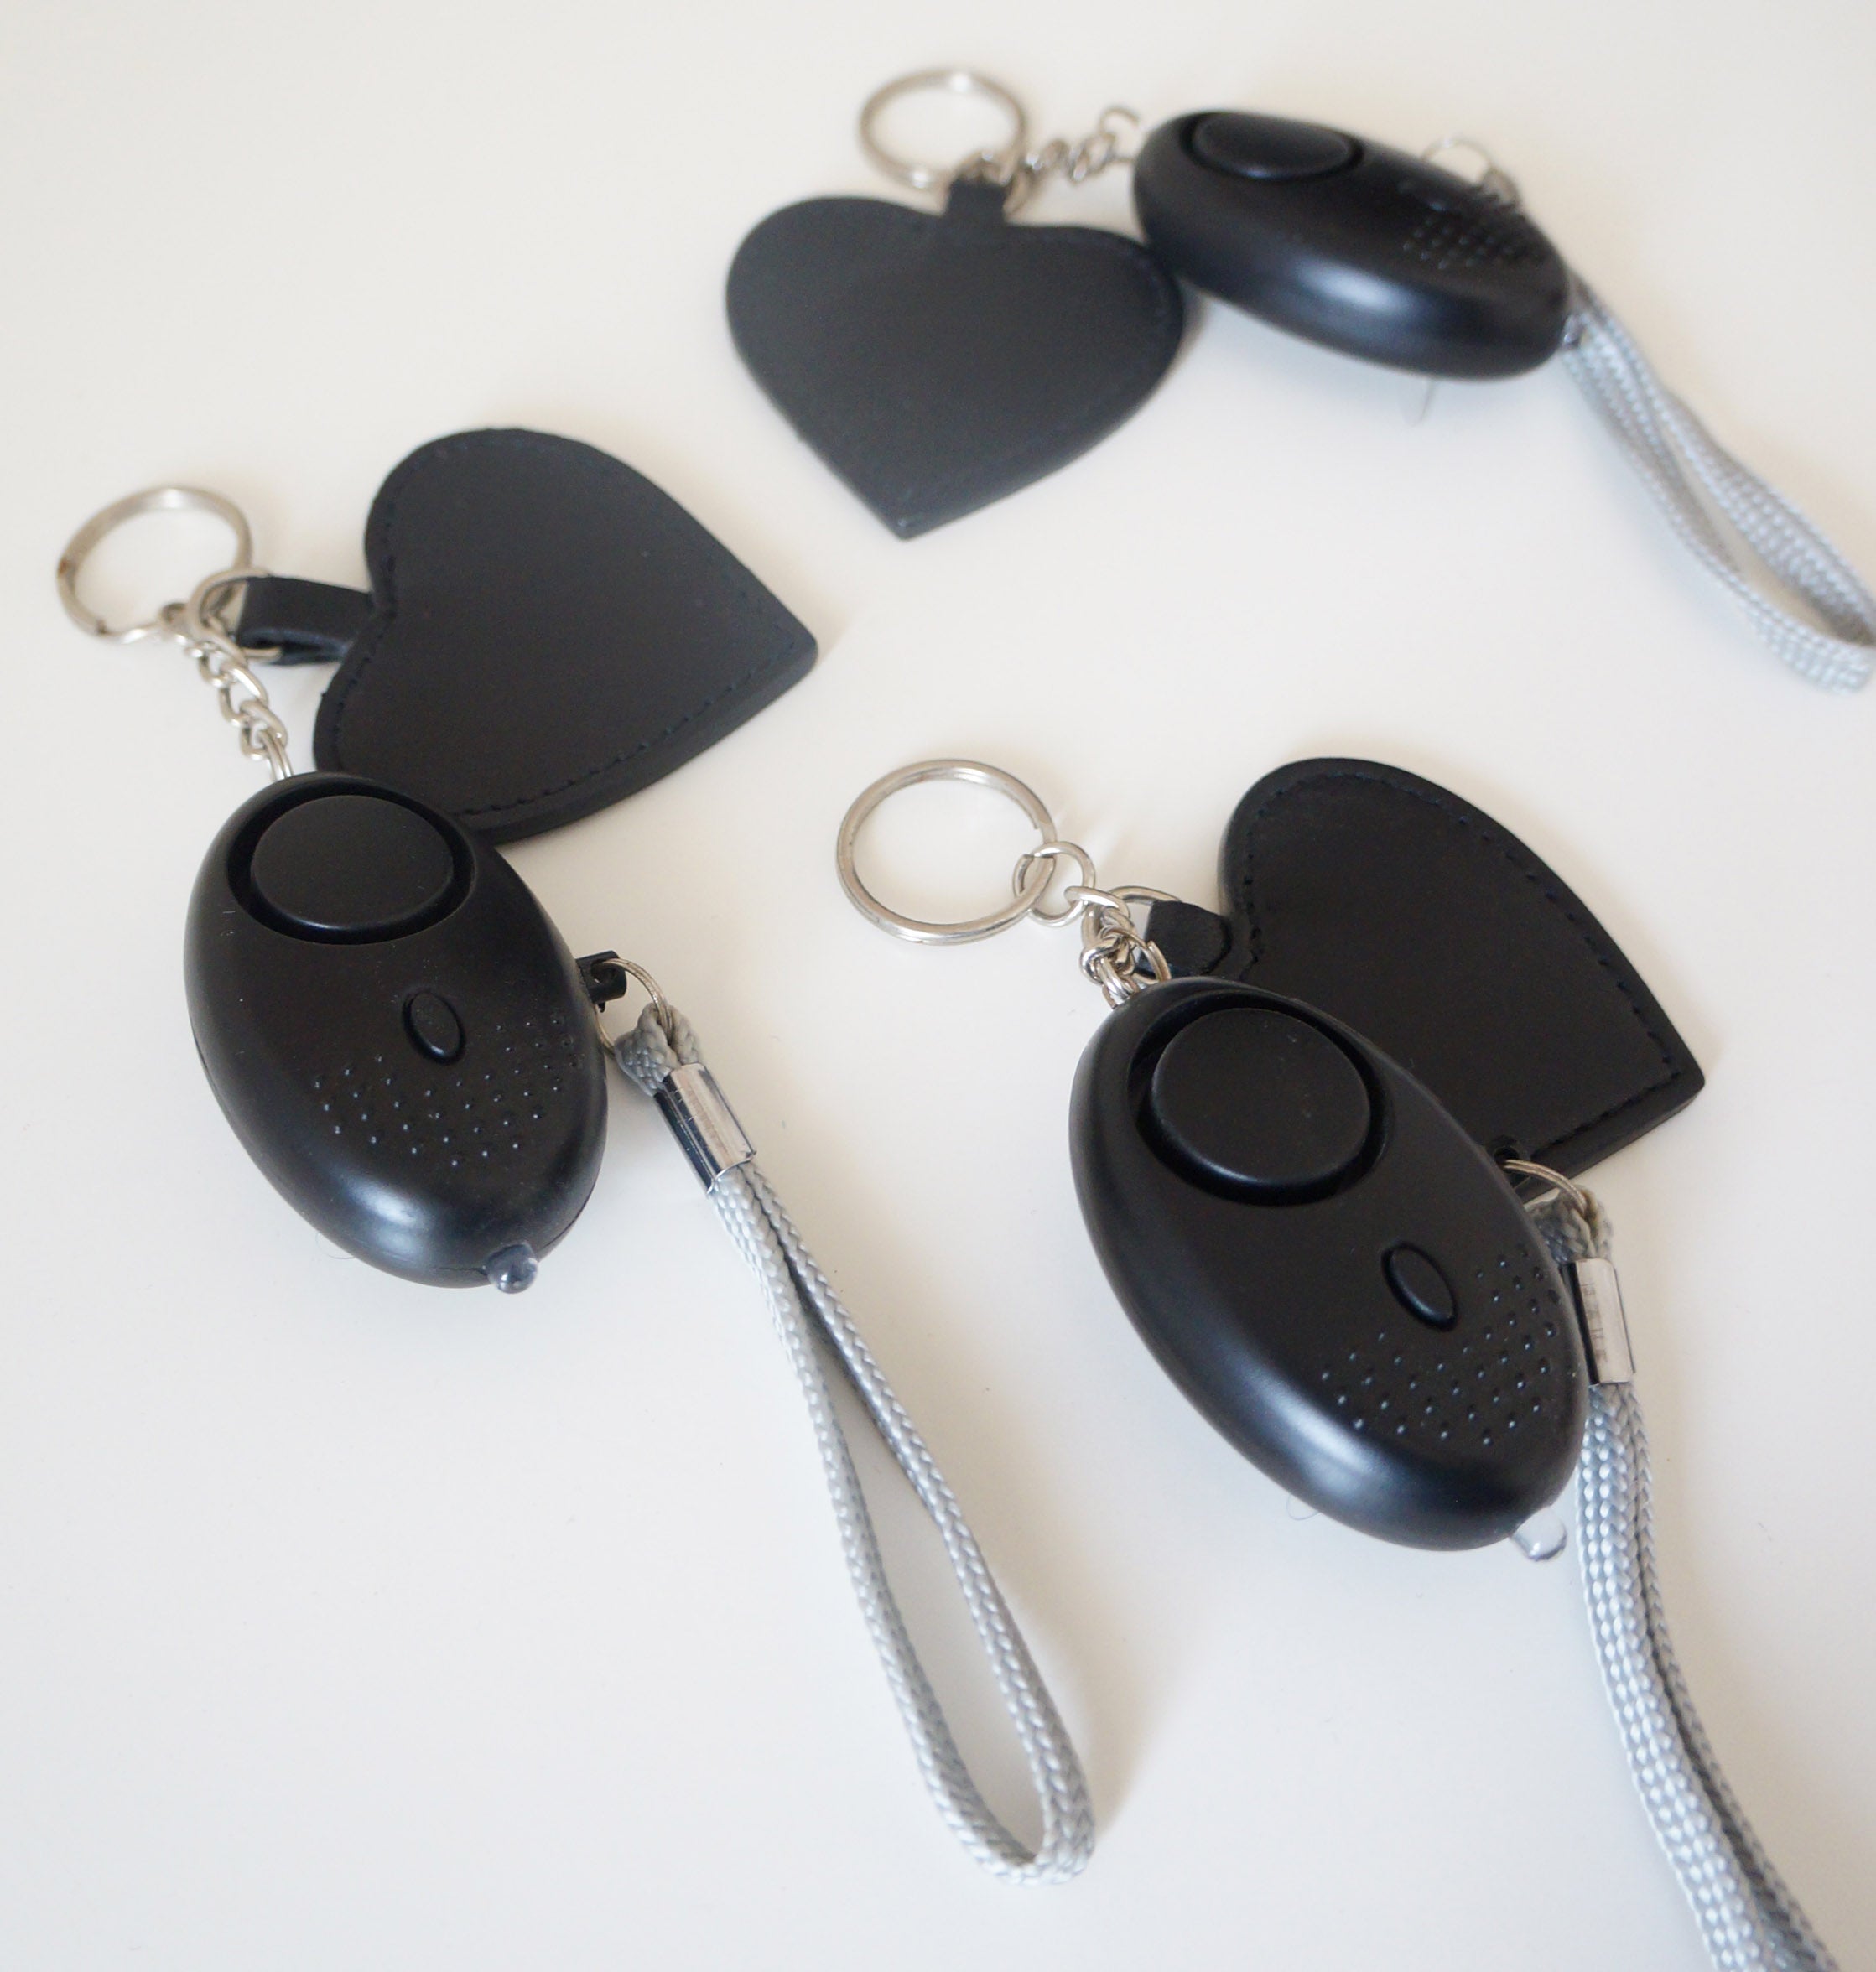 Heart Key Ring with Alarm